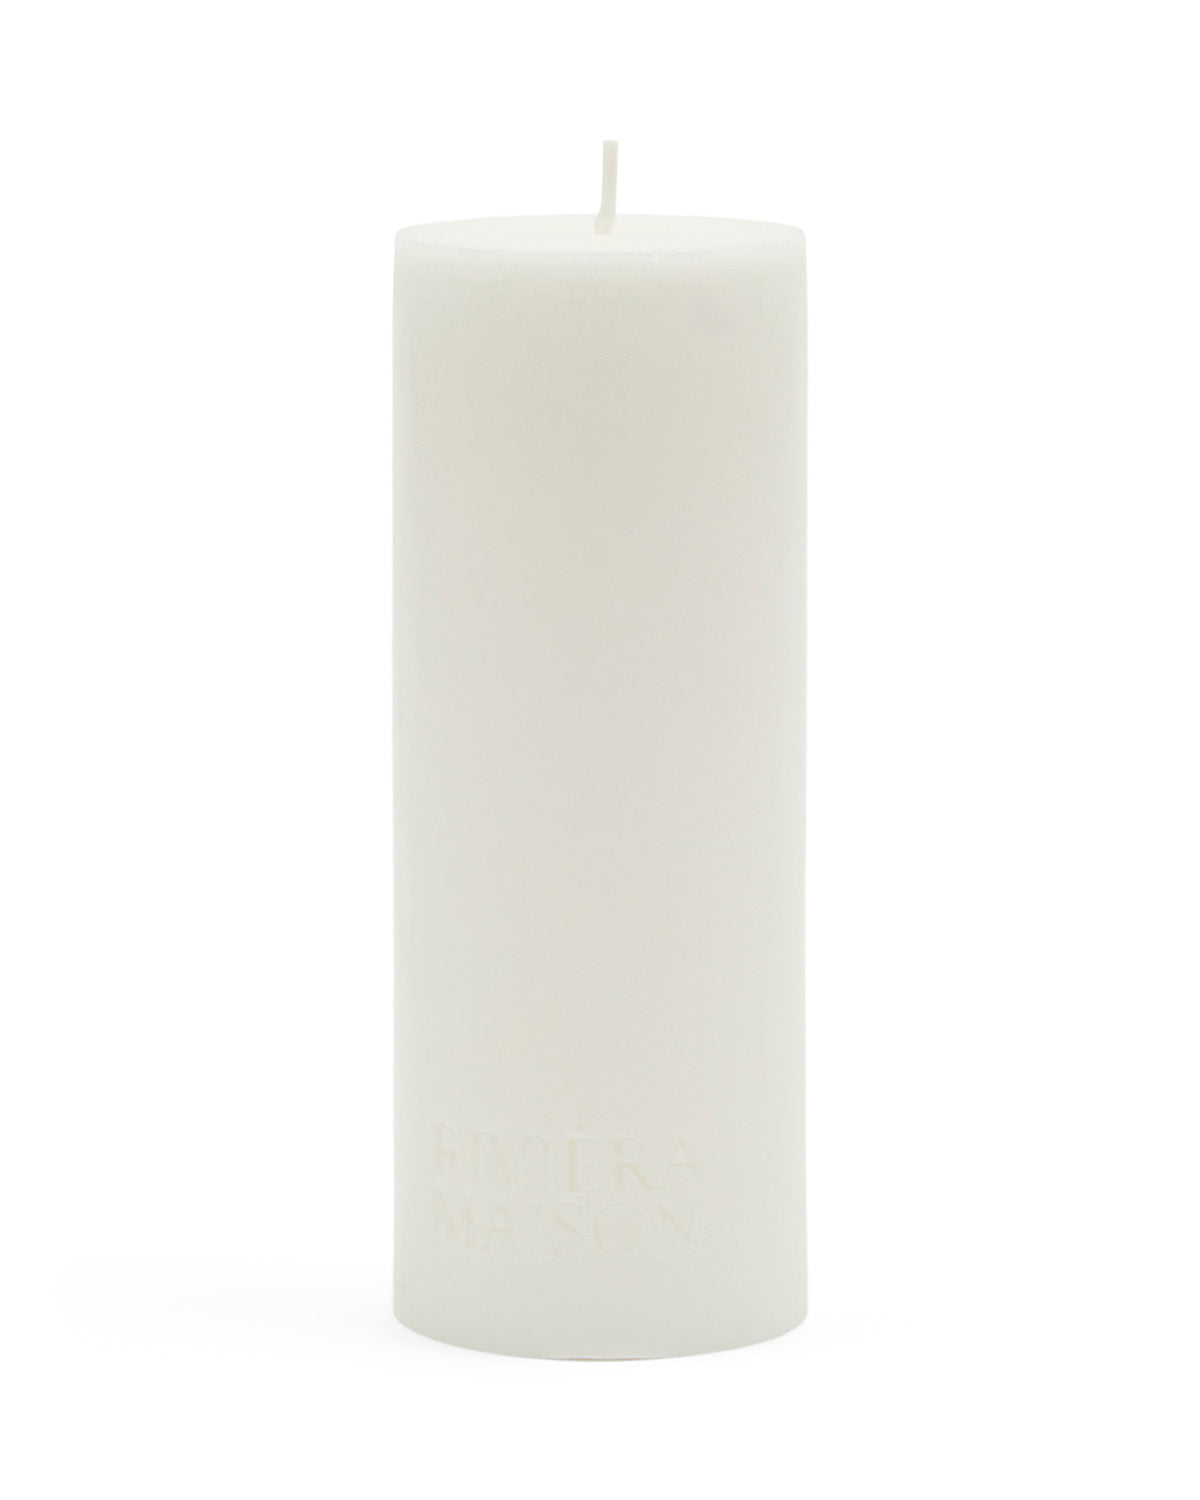 White Candle in color off white by Riviera Maison